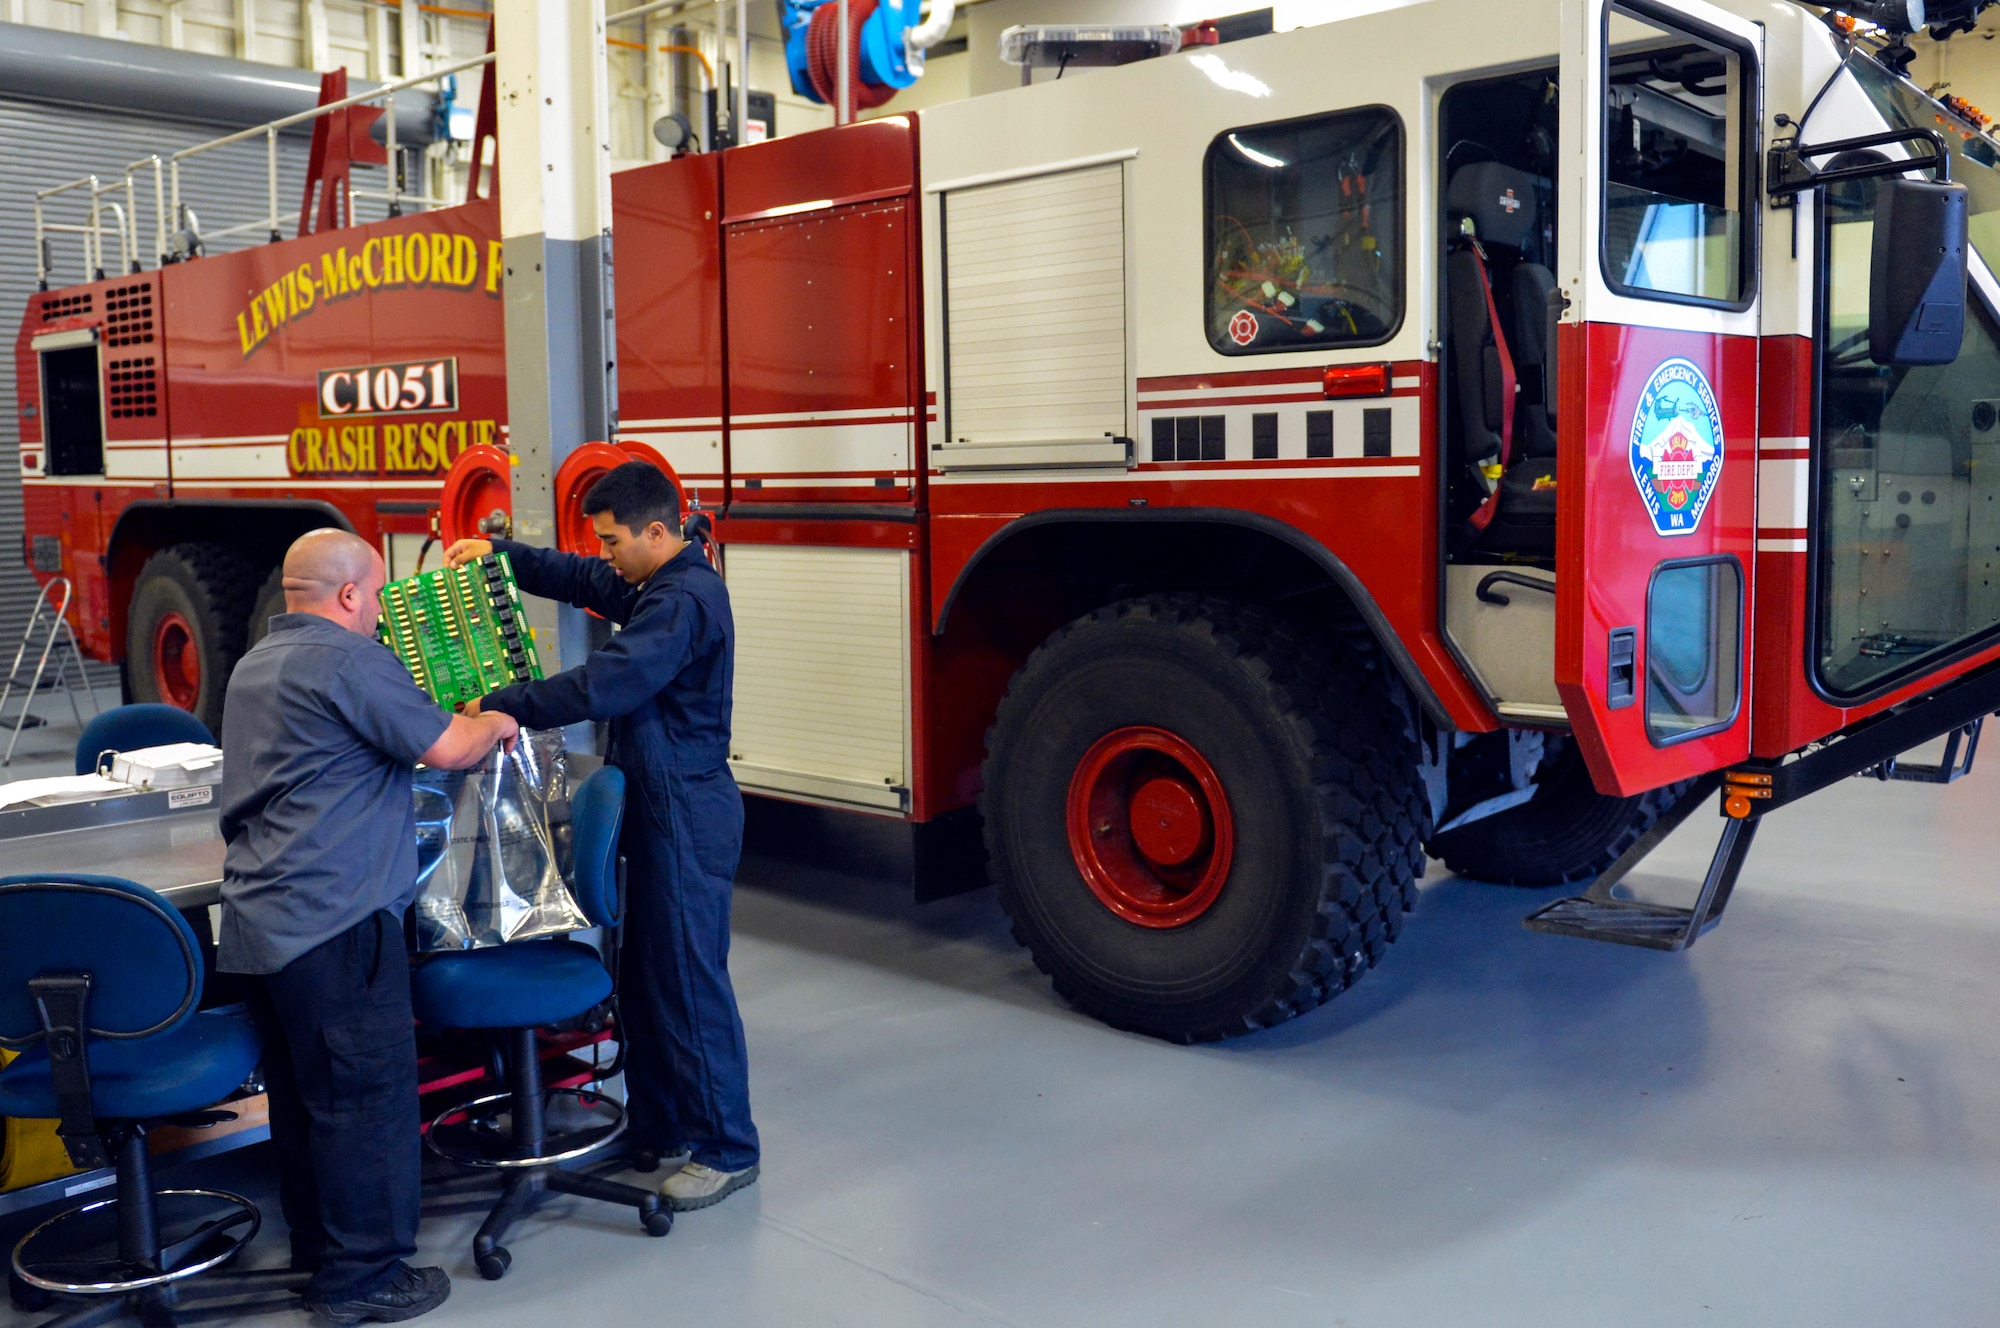 Nick DeLeon, left, and Airman 1st Class Tyler Hill package a circuit card from a rescue fire truck Dec. 9, 2014, at Joint Base Lewis-McChord, Wash. When fire truck maintainers were faced with replacing the $3,000 circuit card, they dug a little deeper into the issue and discovered a $2 solution. DeLeon is the 627th Logistics Readiness Squadron heavy mobile equipment mechanic leader and Hill is a 627th LRS fire truck maintenance journeyman. (U.S. Air Force photo/Staff Sgt. Russ Jackson)